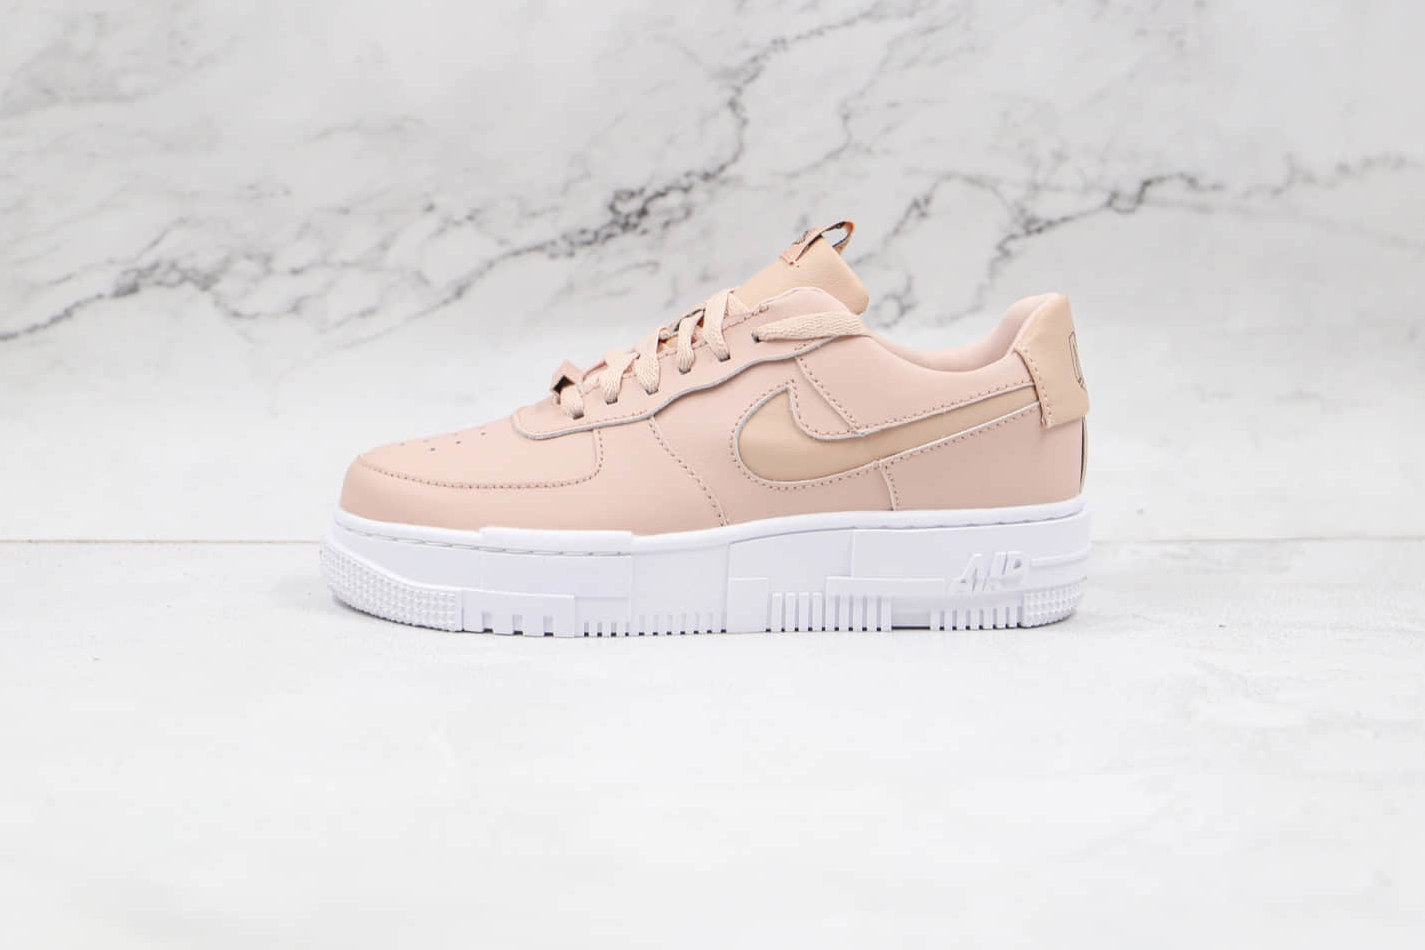 Nike Air Force 1 Pixel Pink White CK6649-002: Chic and Feminine Sneakers!